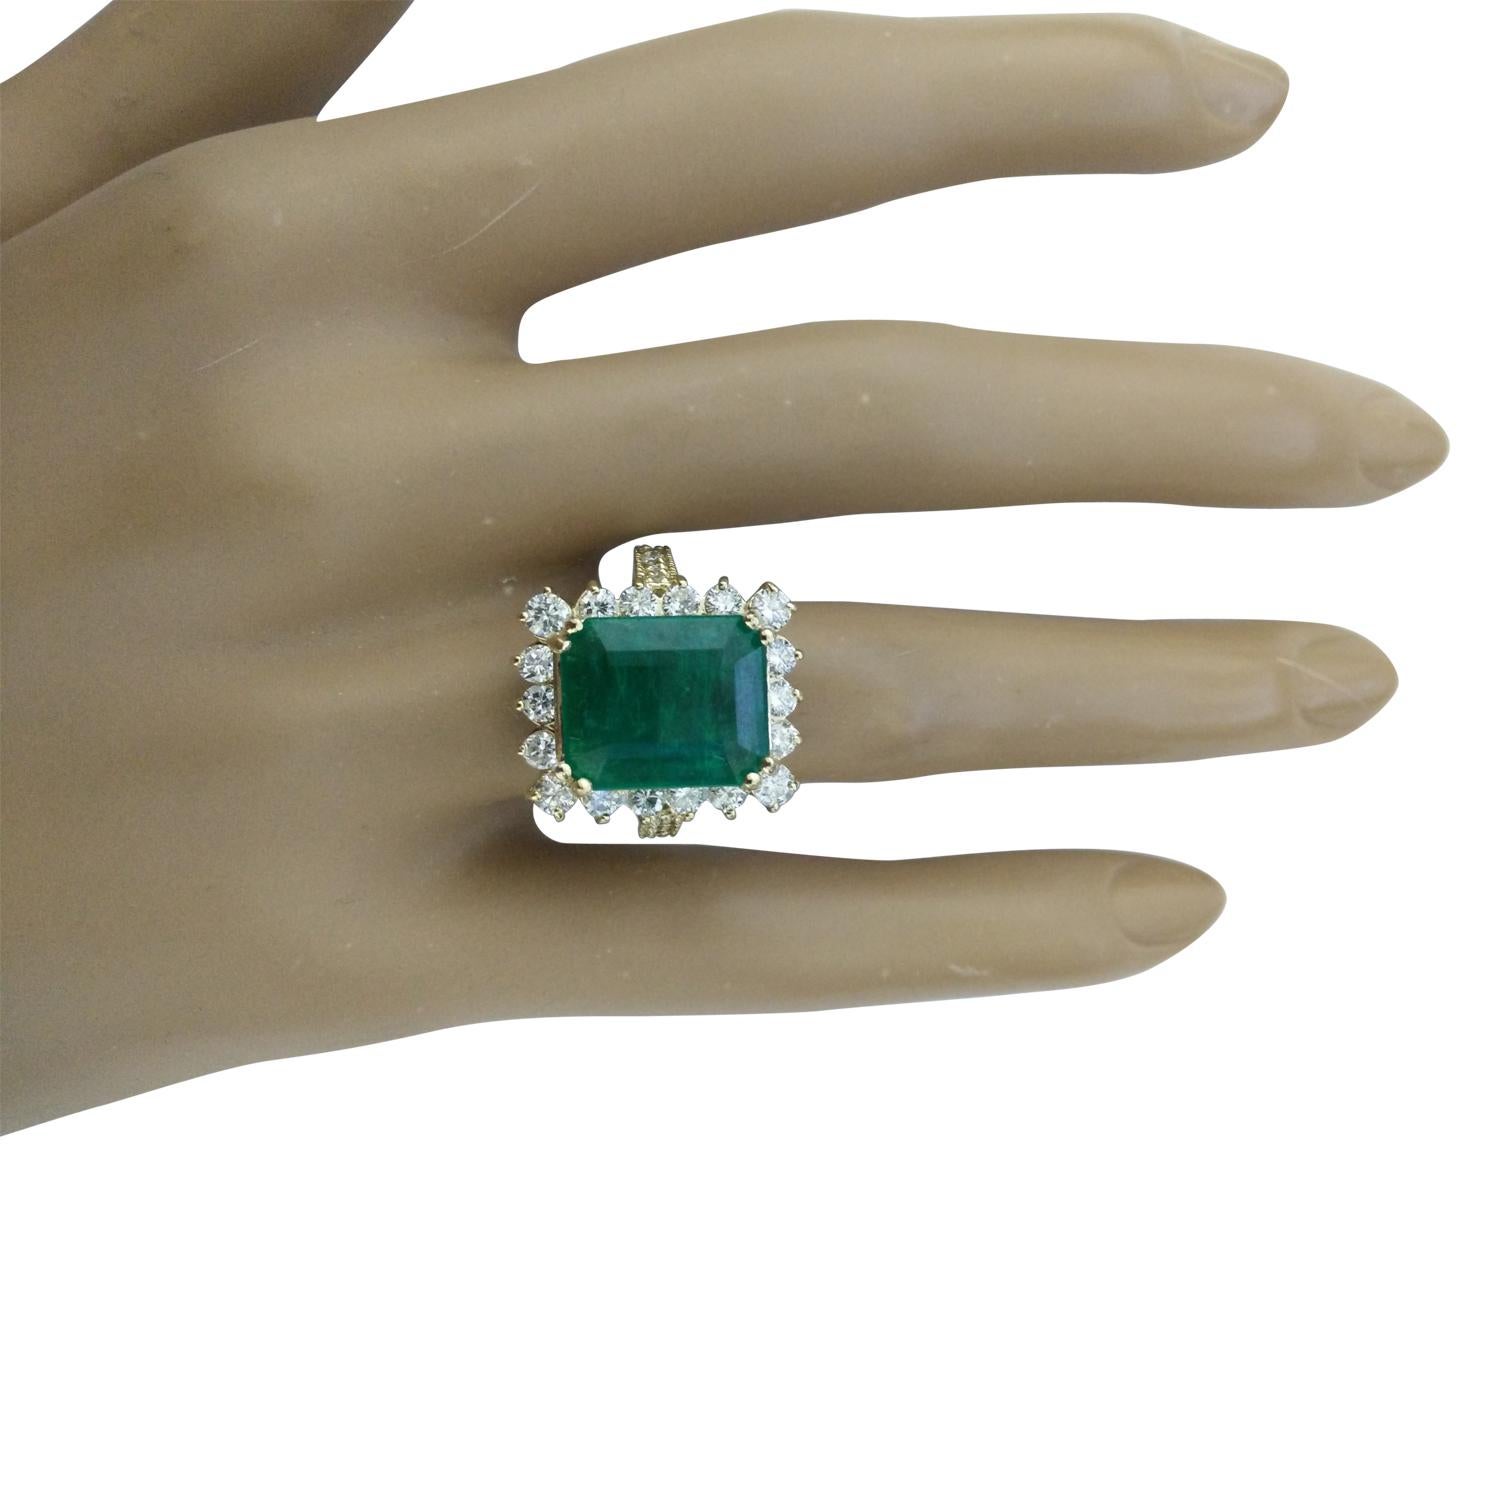 5.16 Carat Natural Emerald 14 Karat Solid Yellow Gold Diamond Ring
Stamped: 14K 
Ring Size: 7 
Total Ring Weight: 6.9 Grams 
Emerald Weight: 4.46 Carat (11.00x9.00 Millimeter) 
Diamond Weight: 0.70 Carat (F-G Color, VS2-SI1 Clarity)
Quantity: